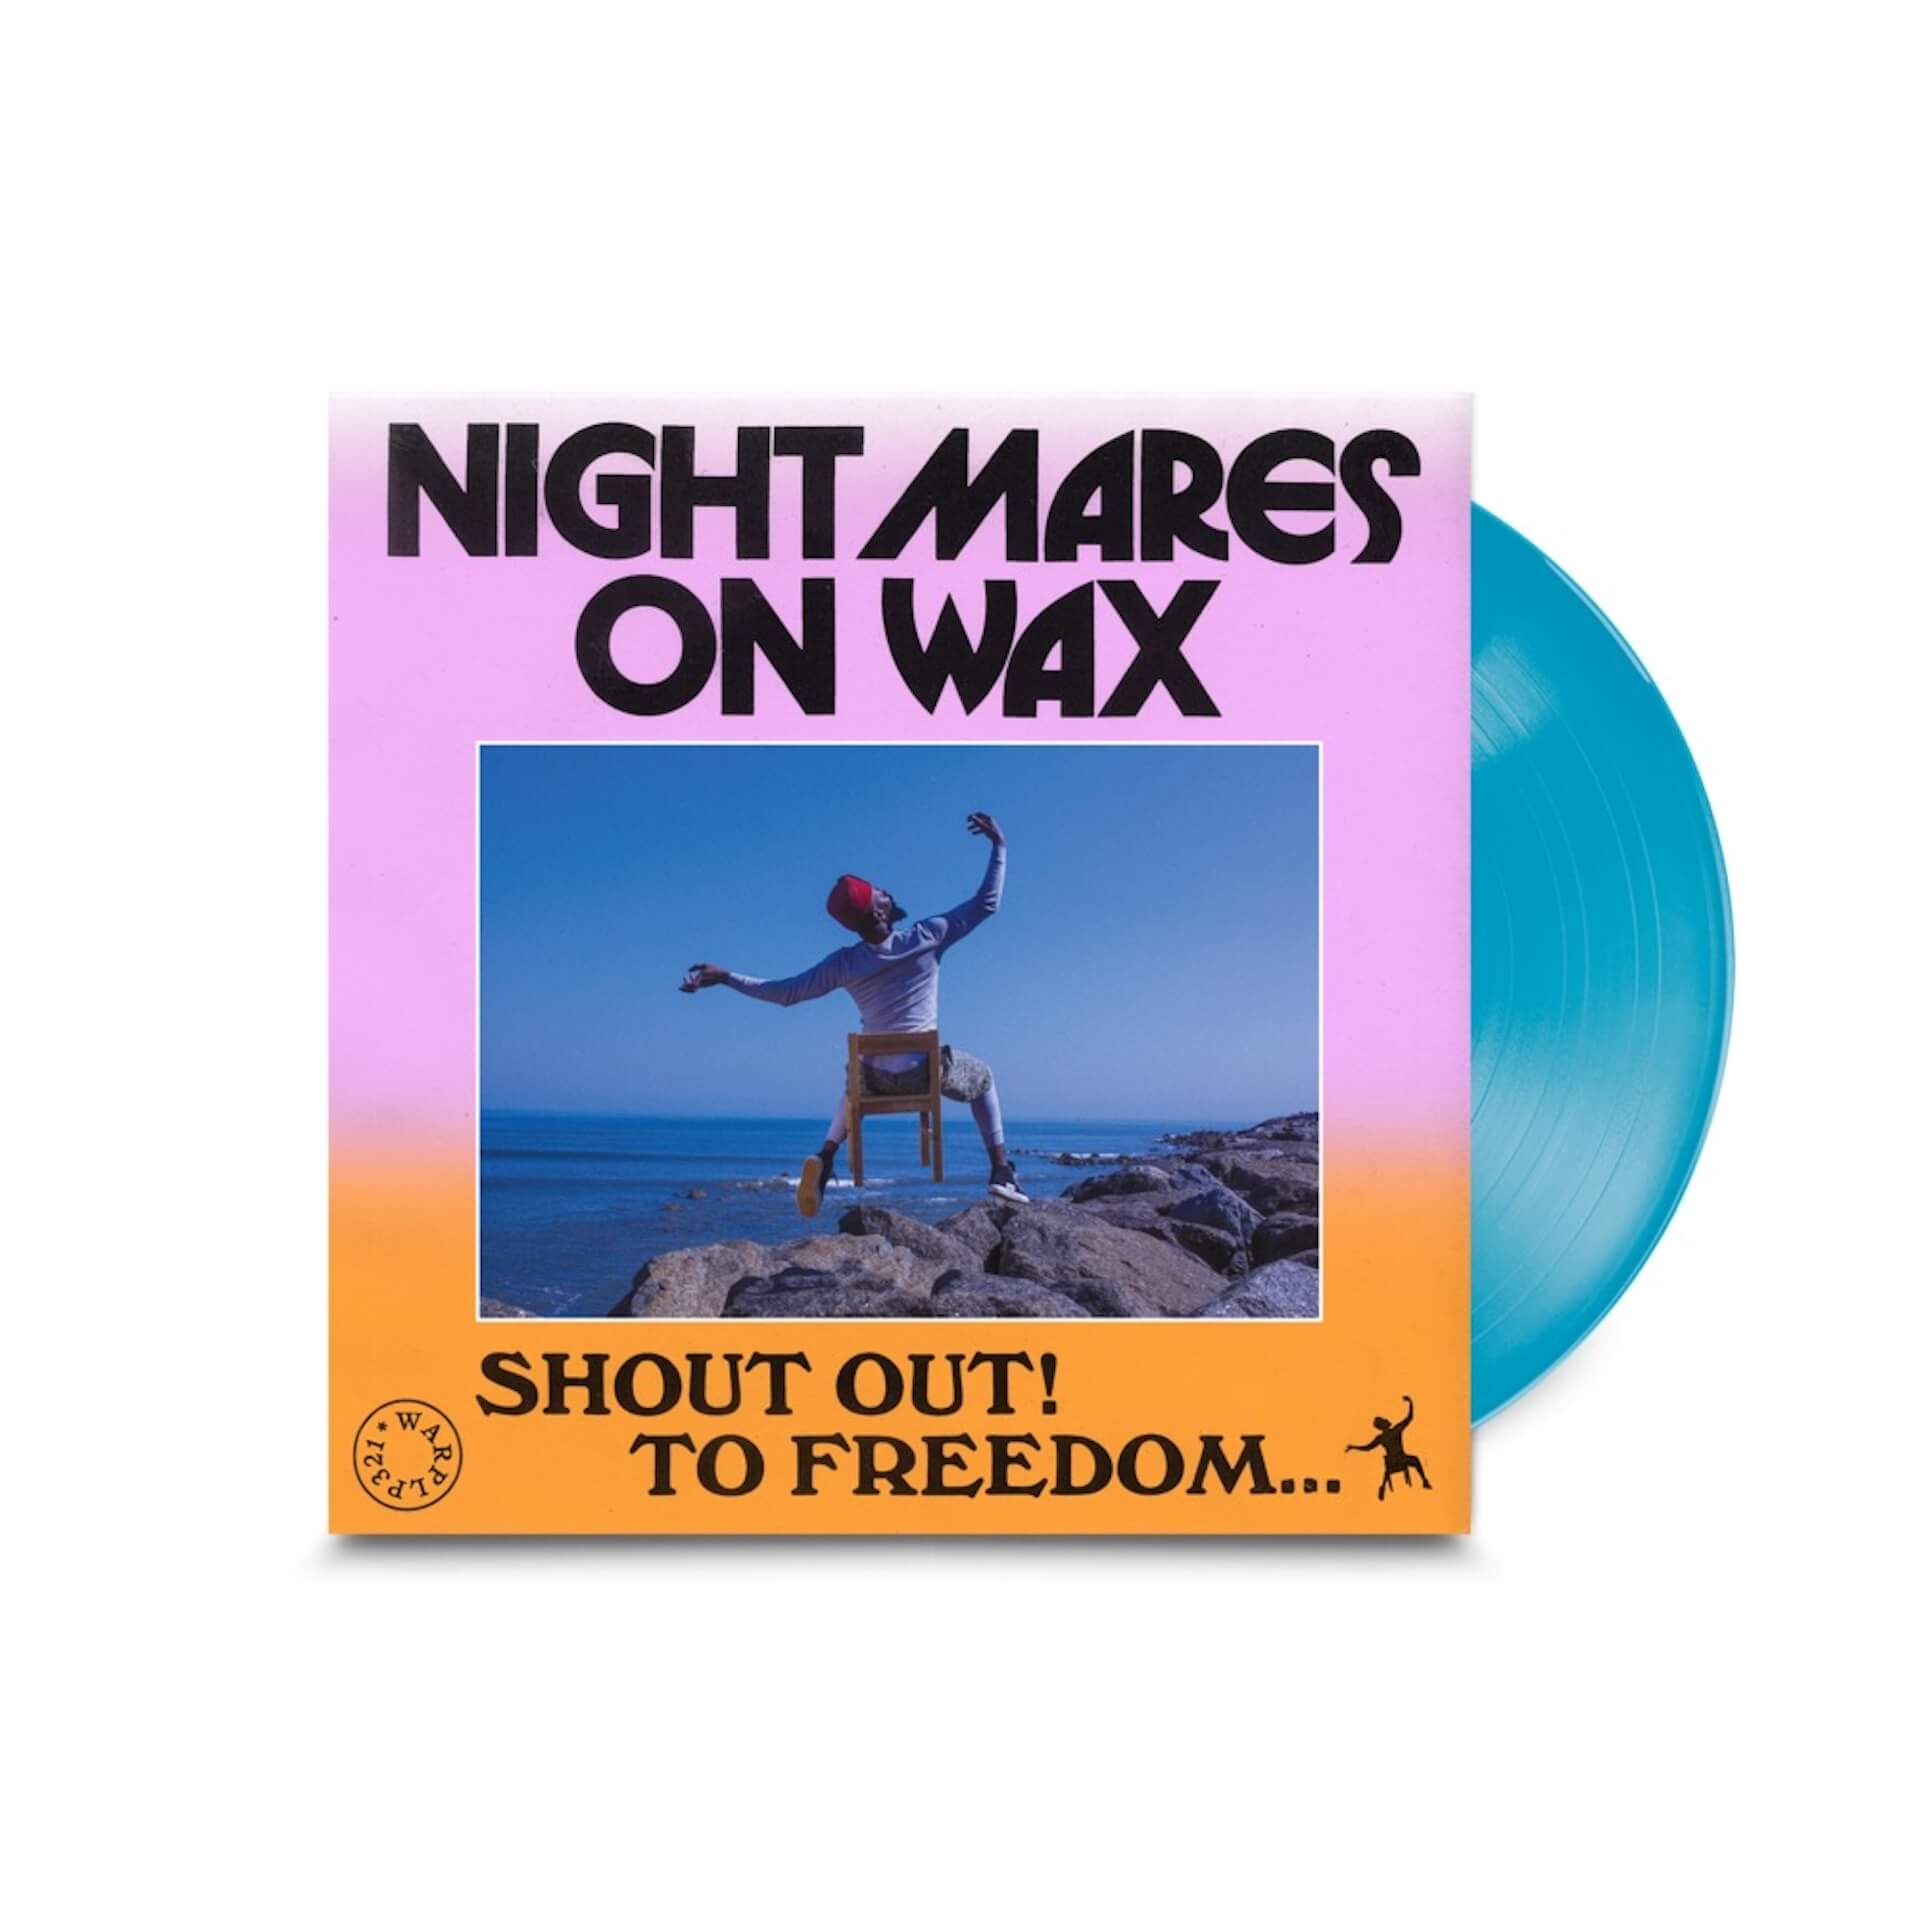 Nightmares On Waxの最新アルバム『SHOUT OUT！ TO FREEDOM…』がリリース決定！ダブルAサイドシングル“Wonder”と“Own Me”も解禁 music210902_now_3